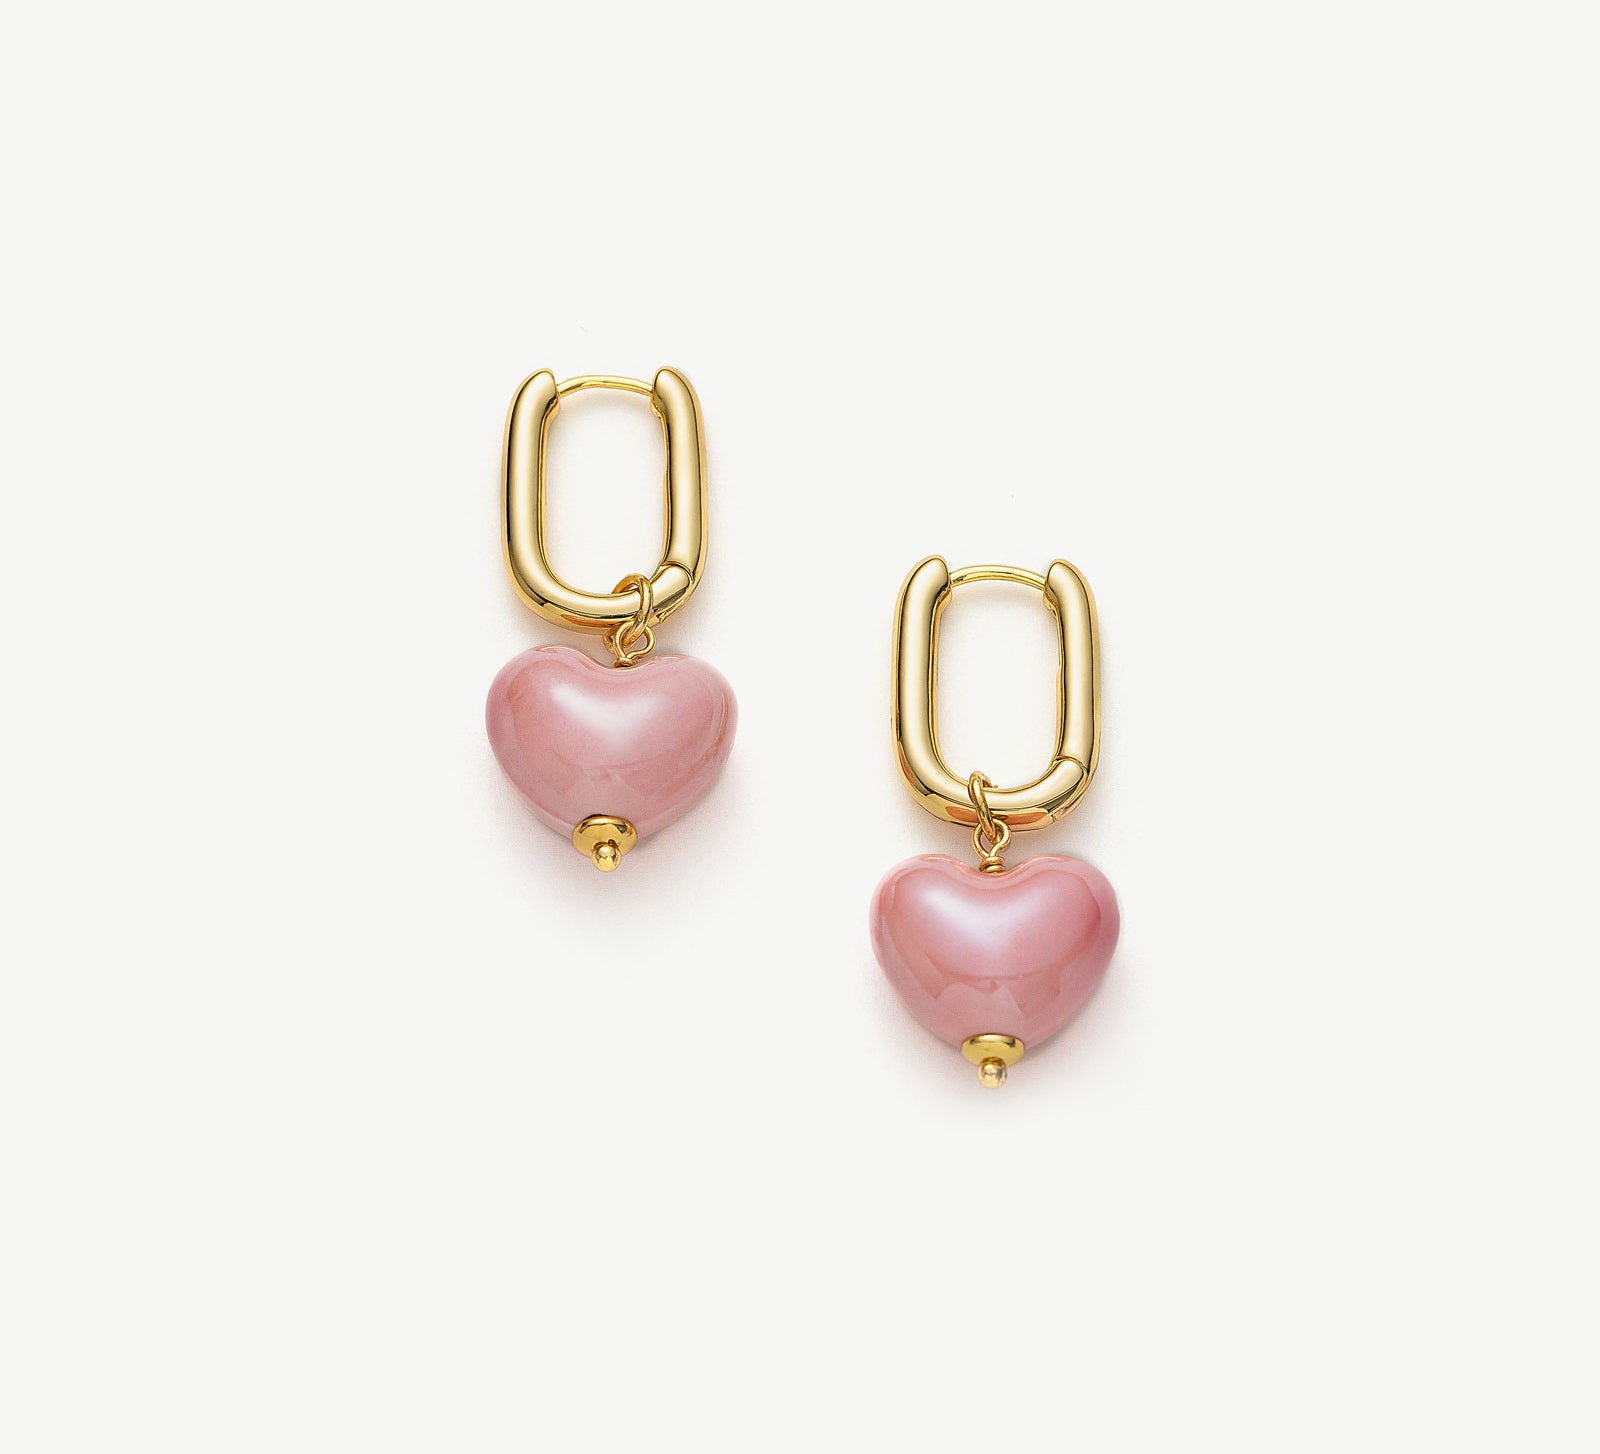 Ceramics Heart Hoop Earrings in Pink, a romantic and blush-toned accessory that adds a touch of love and charm to your ear ensemble.